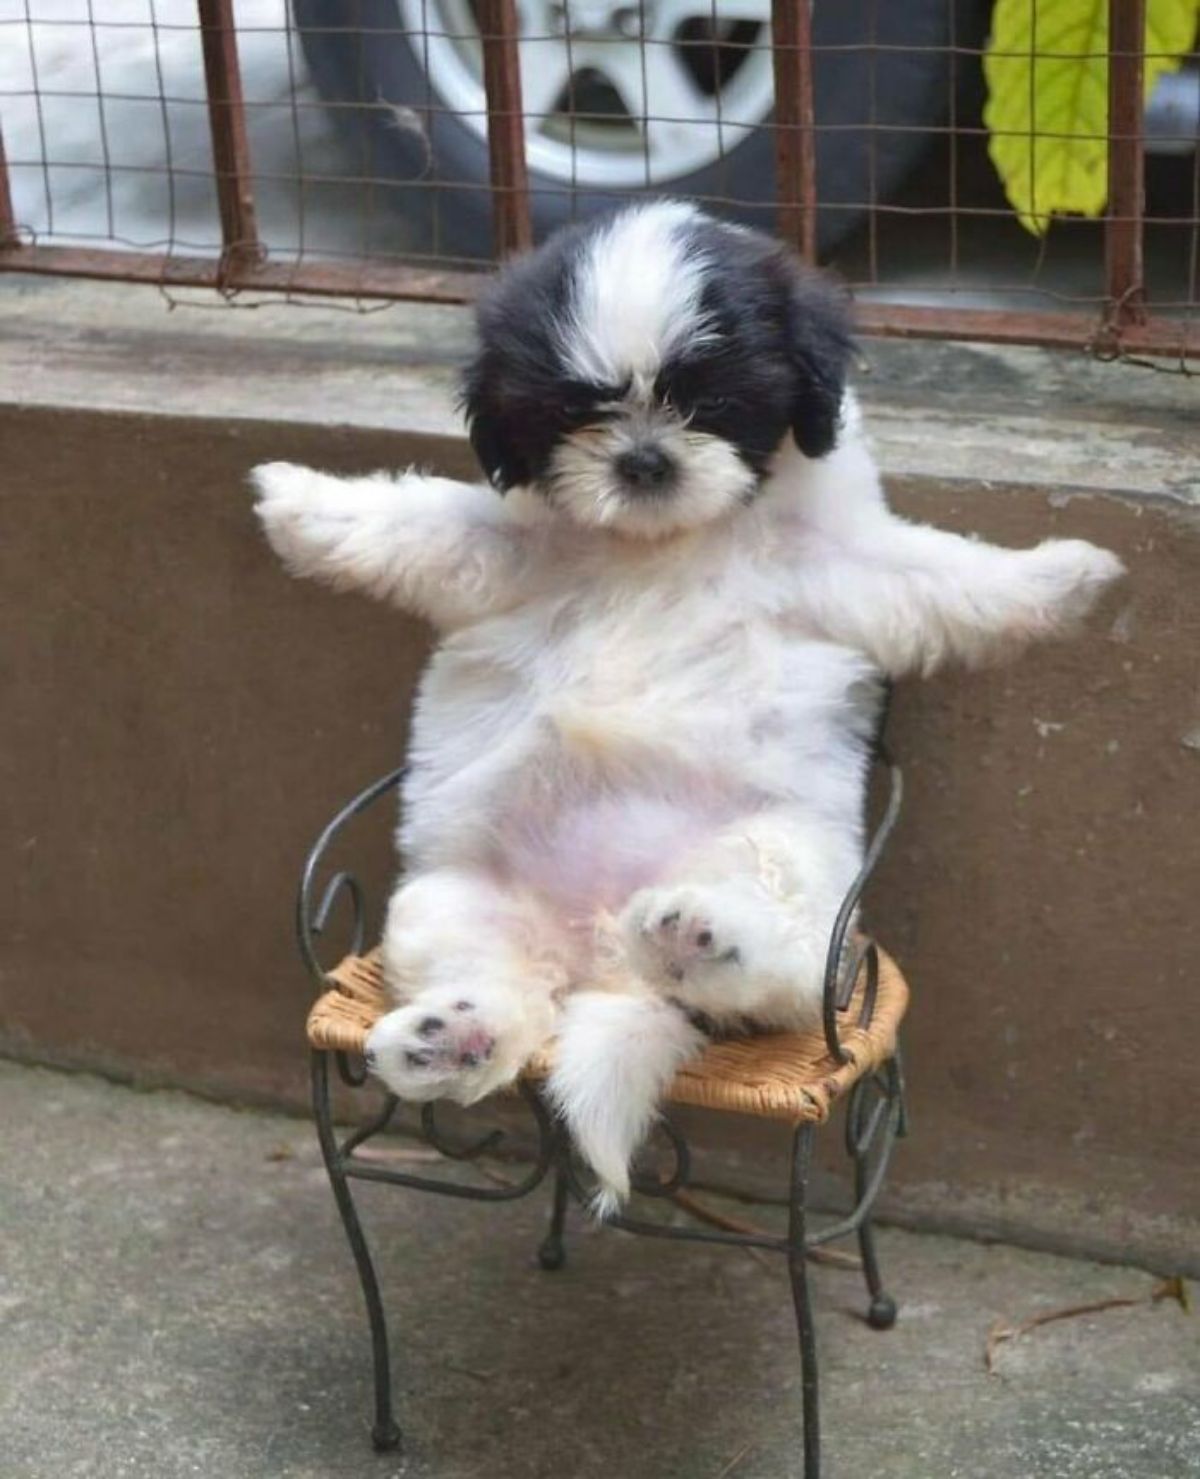 black and white fluffy dog sitting upright on a wicker and metal chair with the two front legs extended out to its sides